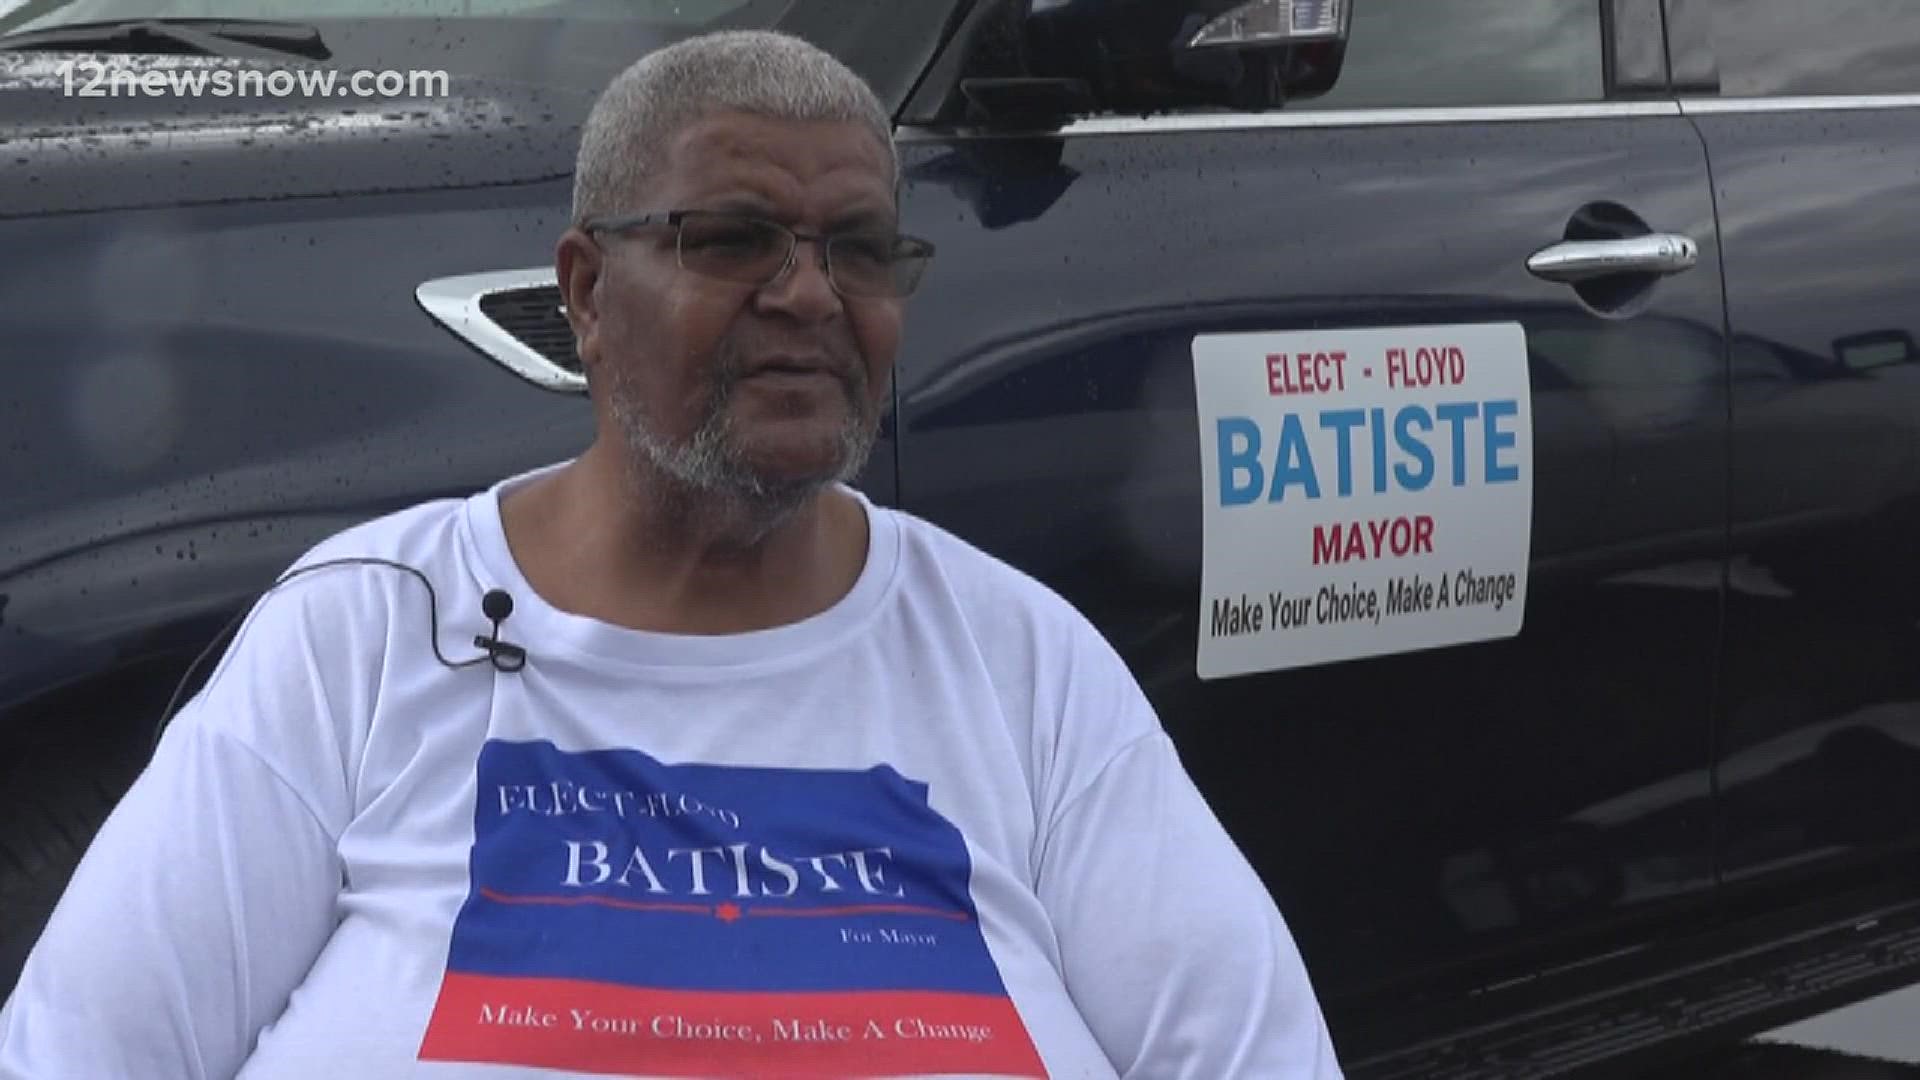 Mayor Thurman Bartie and Floyd Batiste will face off in a runoff, Bridge City voters voted to increase taxes to build better facilities for students, and more.